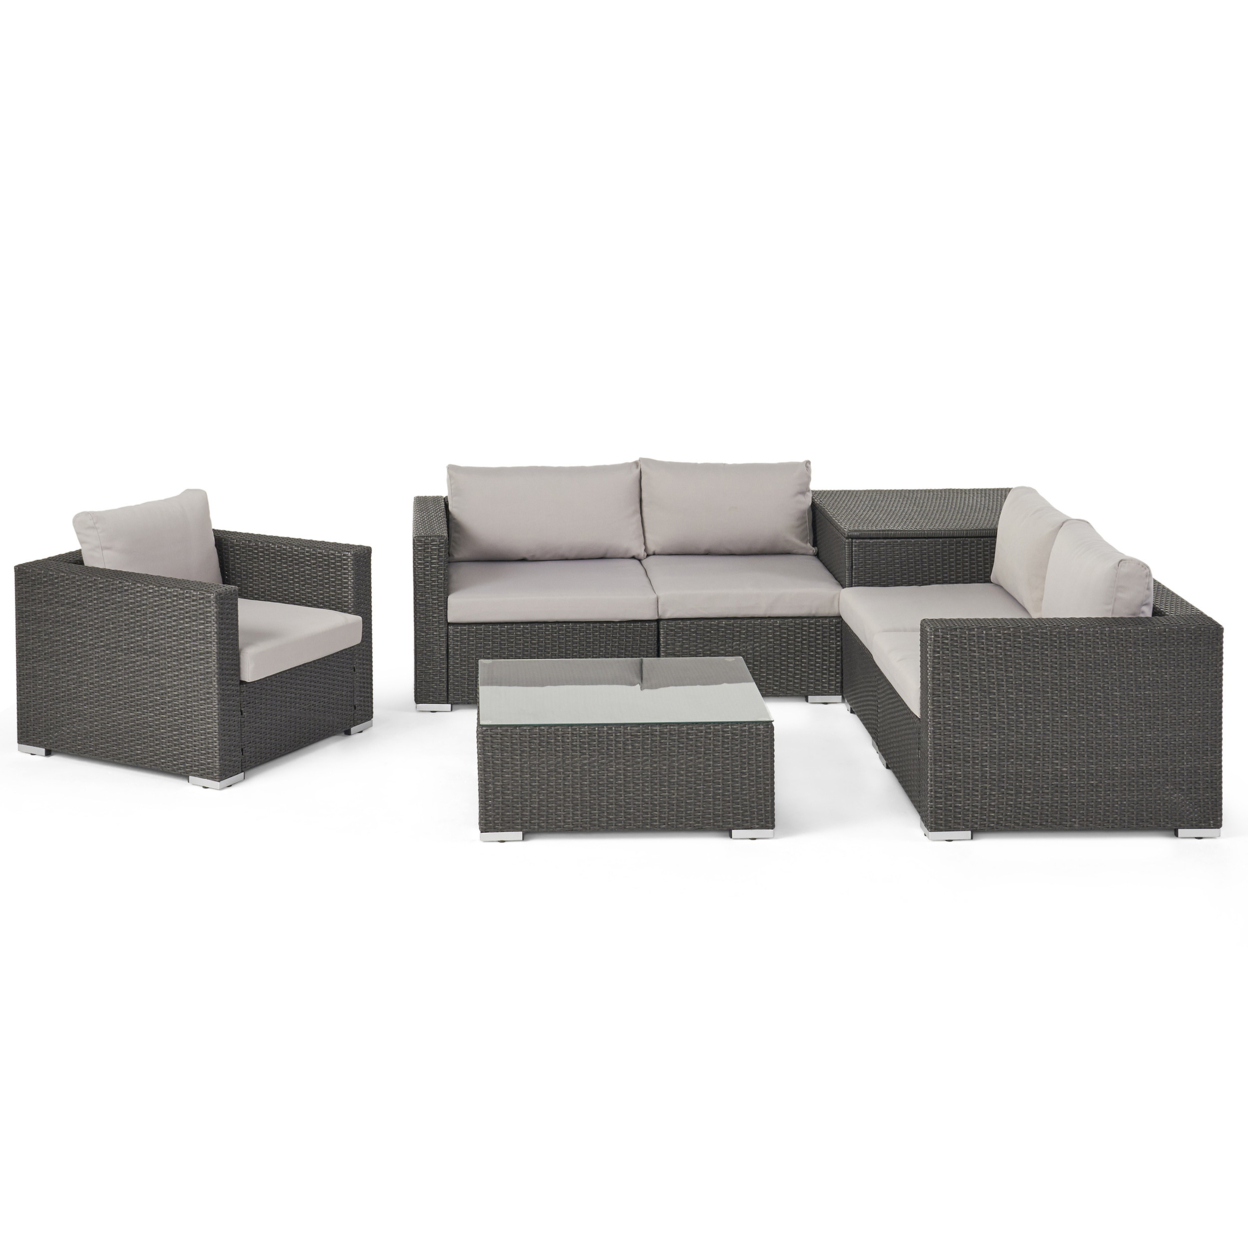 Valentina Outdoor 5-Seater Sectional Sofa Set With Club Chair And Storage Ottoman